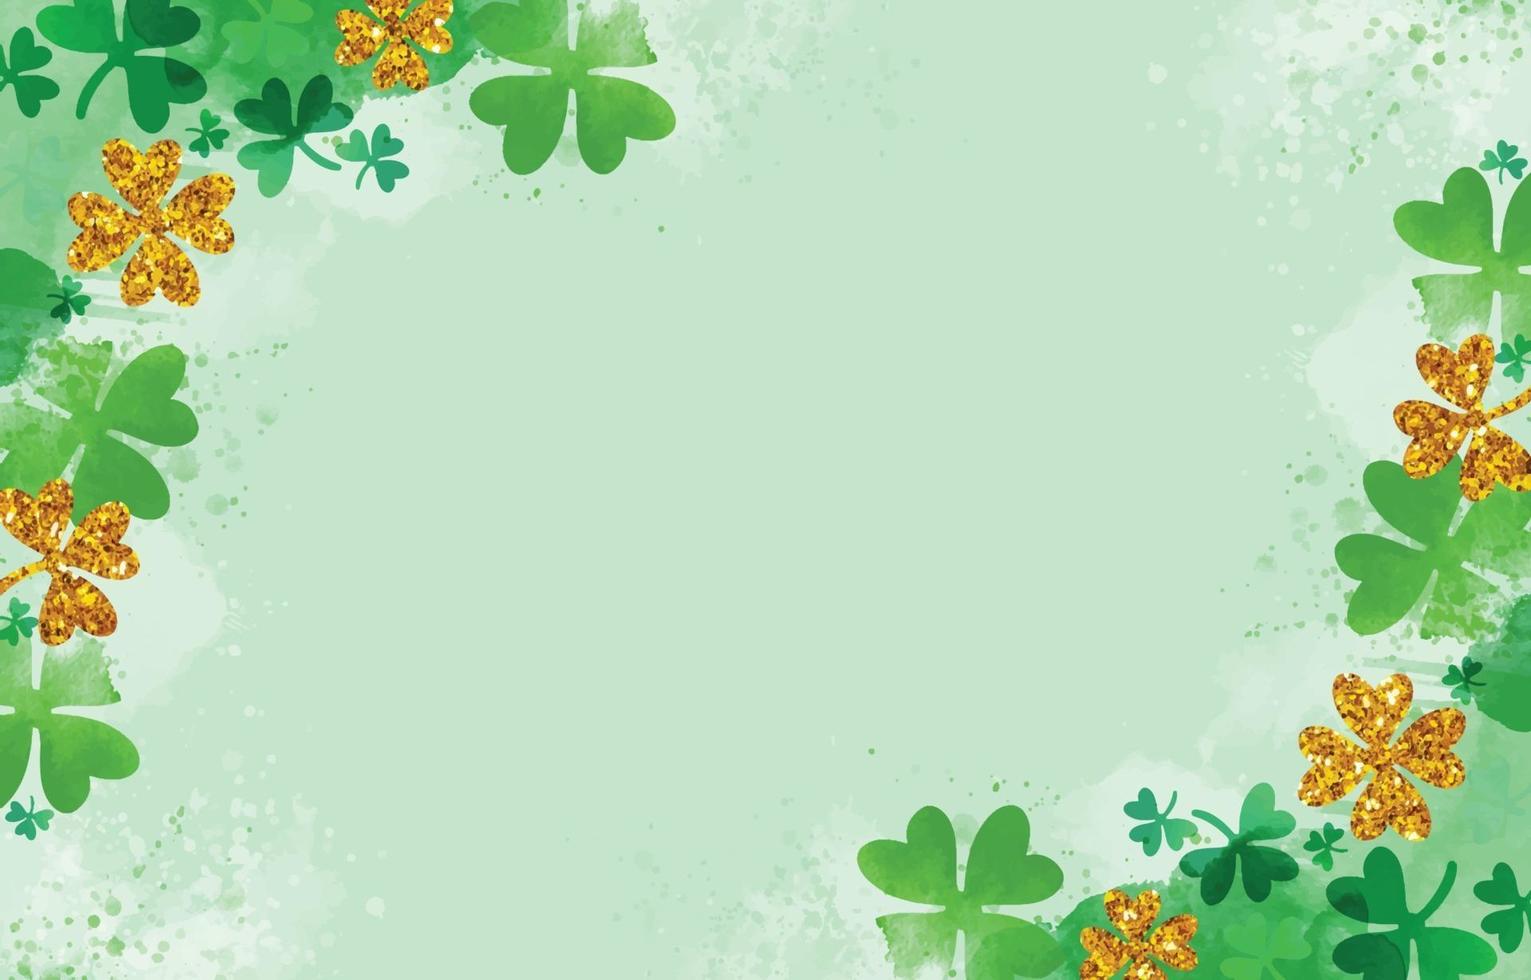 Watercolor and Glitter Shamrock Background vector